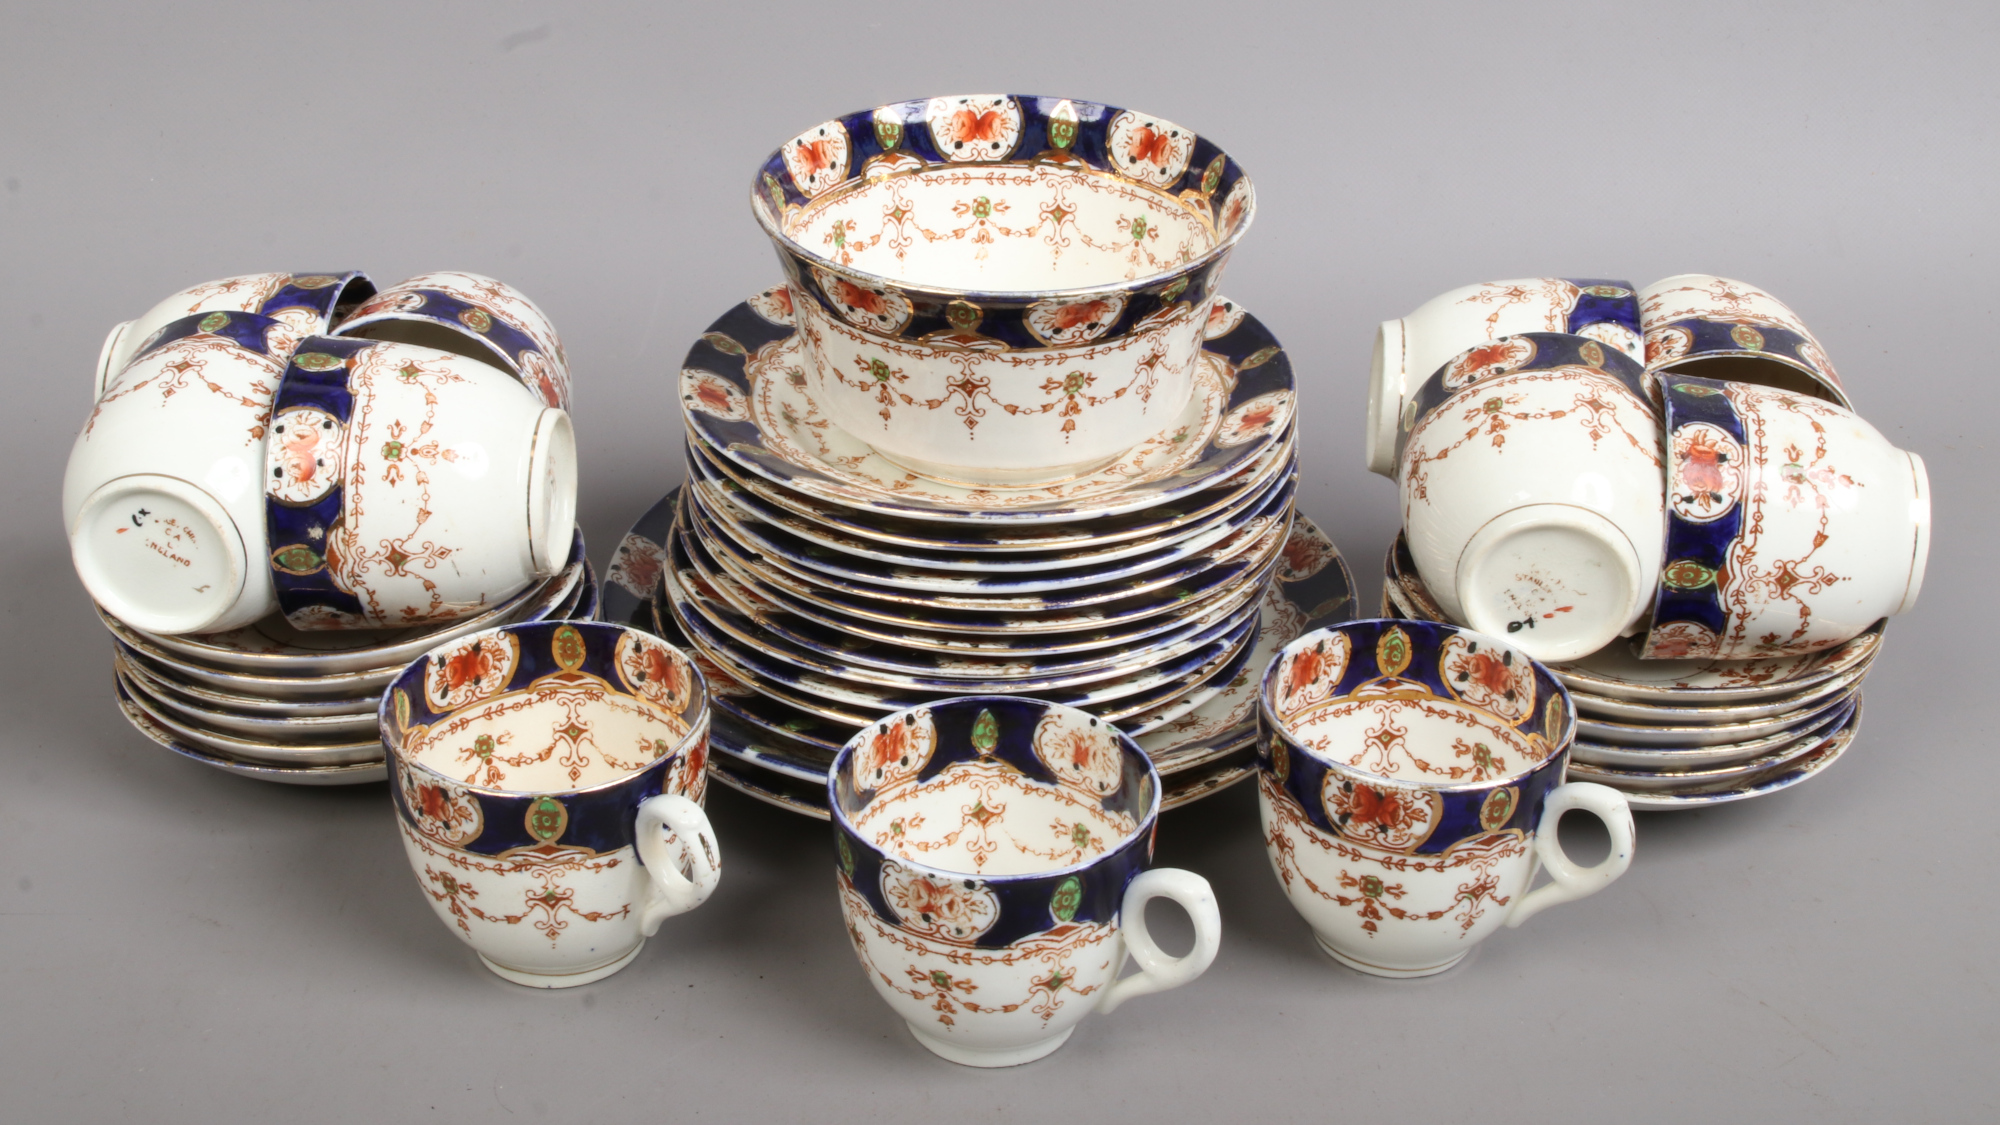 A Stanley china part tea set decorated in the City pattern.